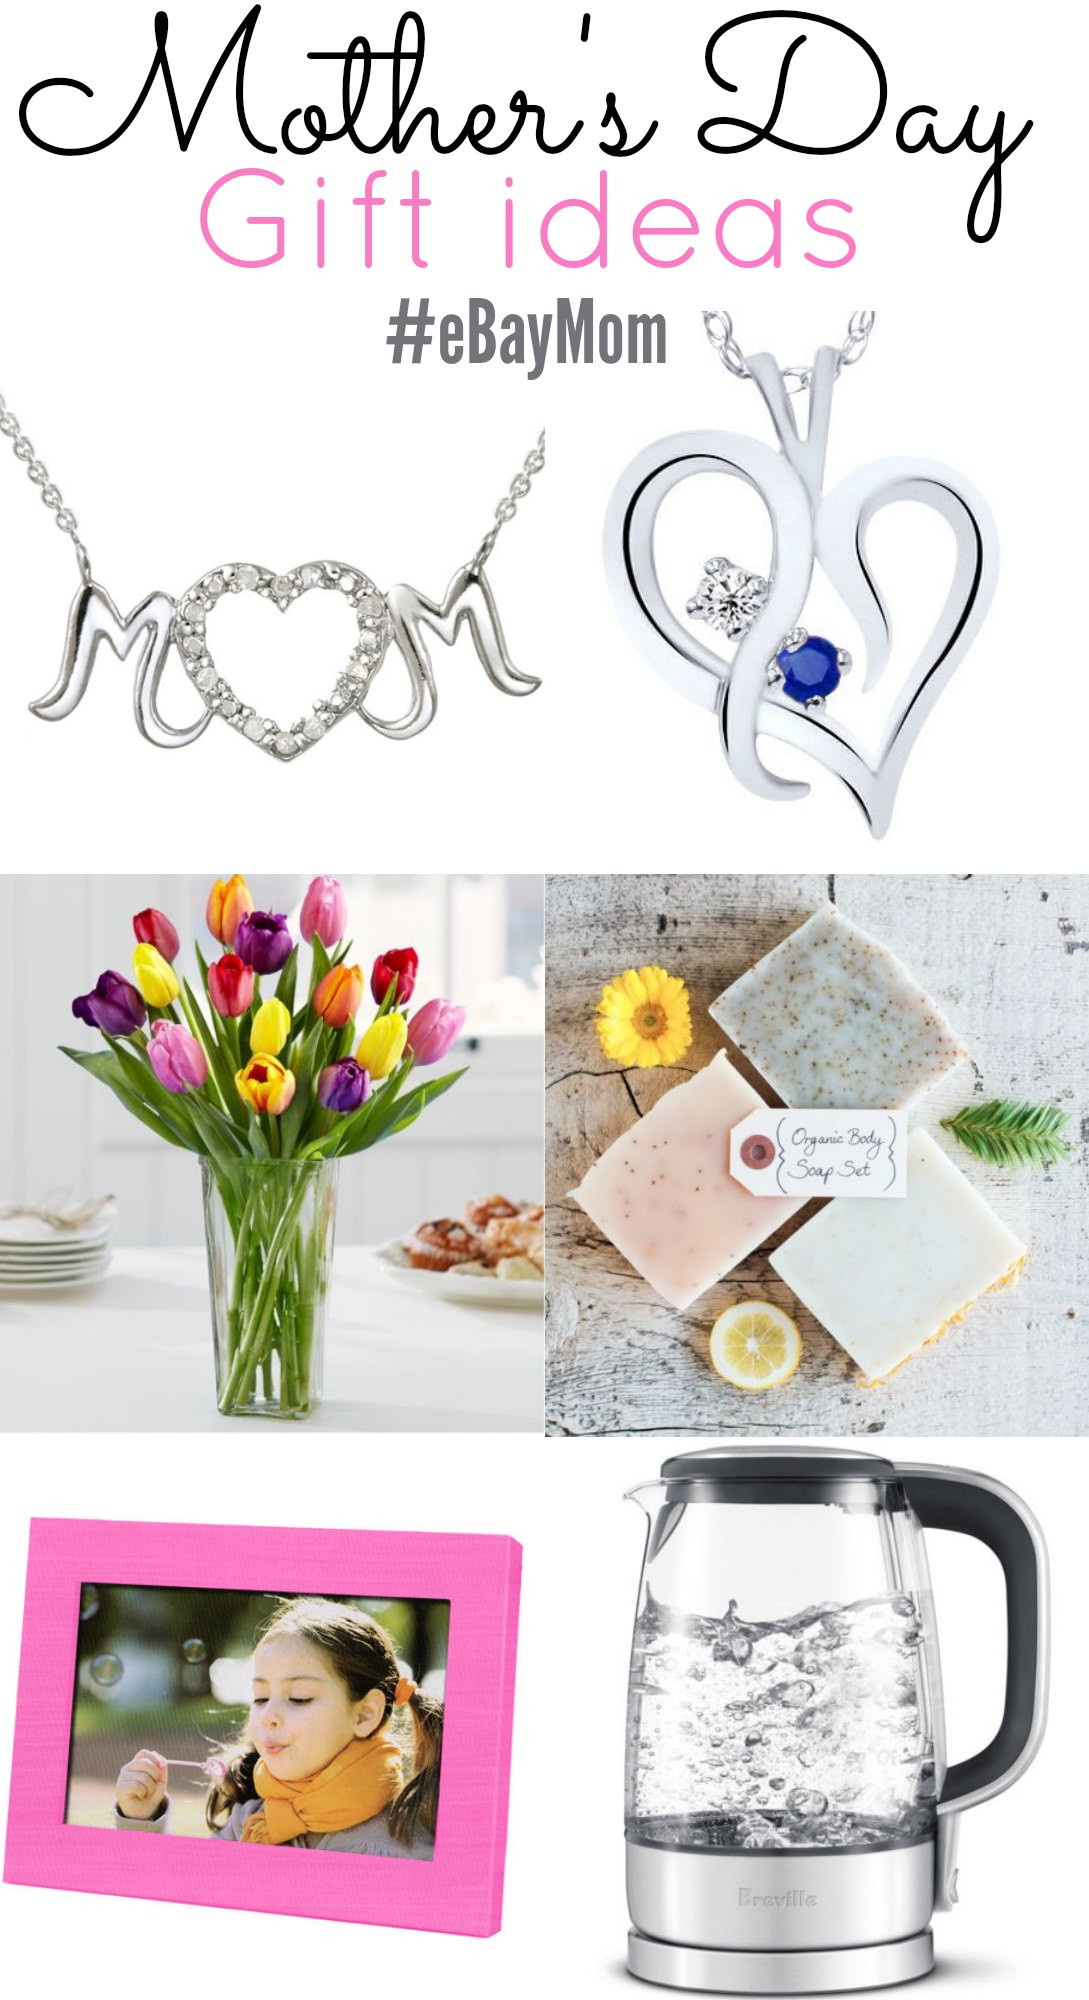 Mothersday Gift Ideas
 Mother’s Day Gift Ideas & Sweepstakes eBayMom ad